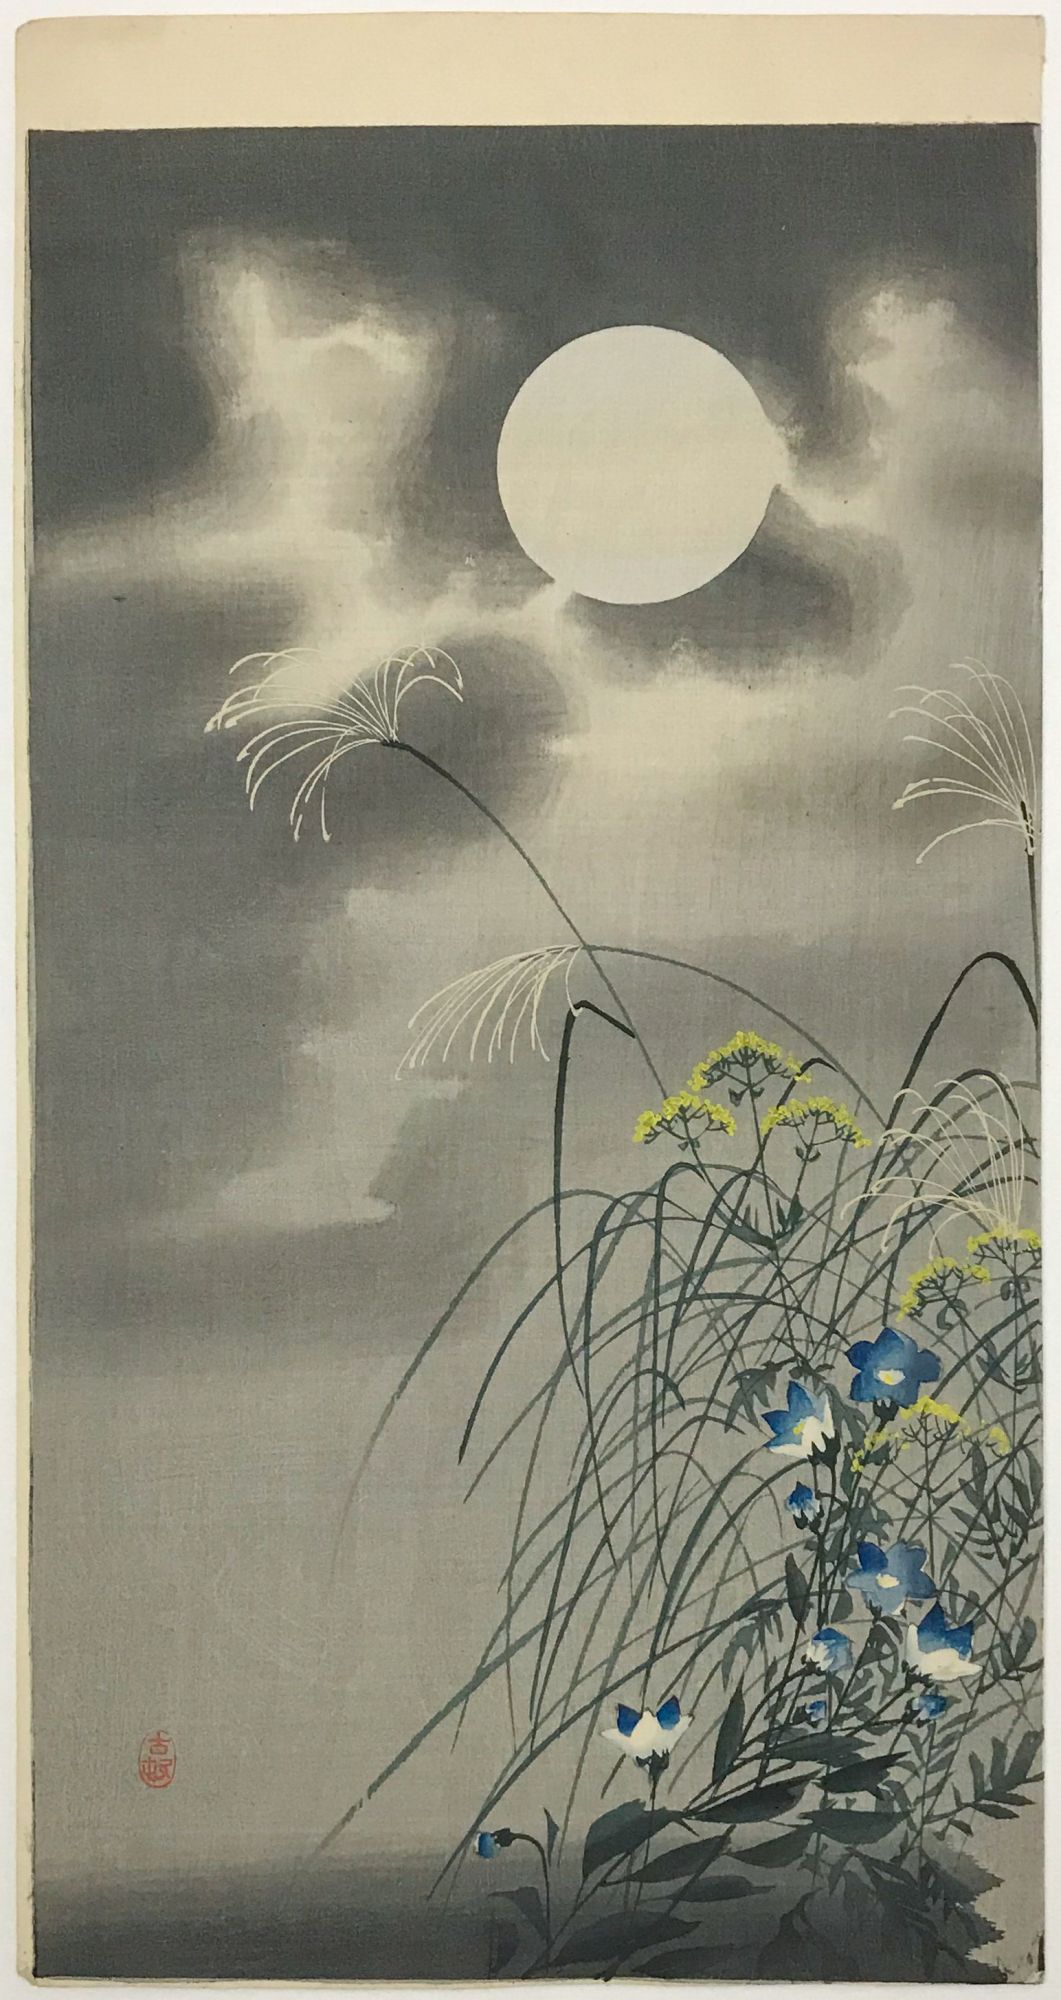 Autumn grasses, flowers and moon.